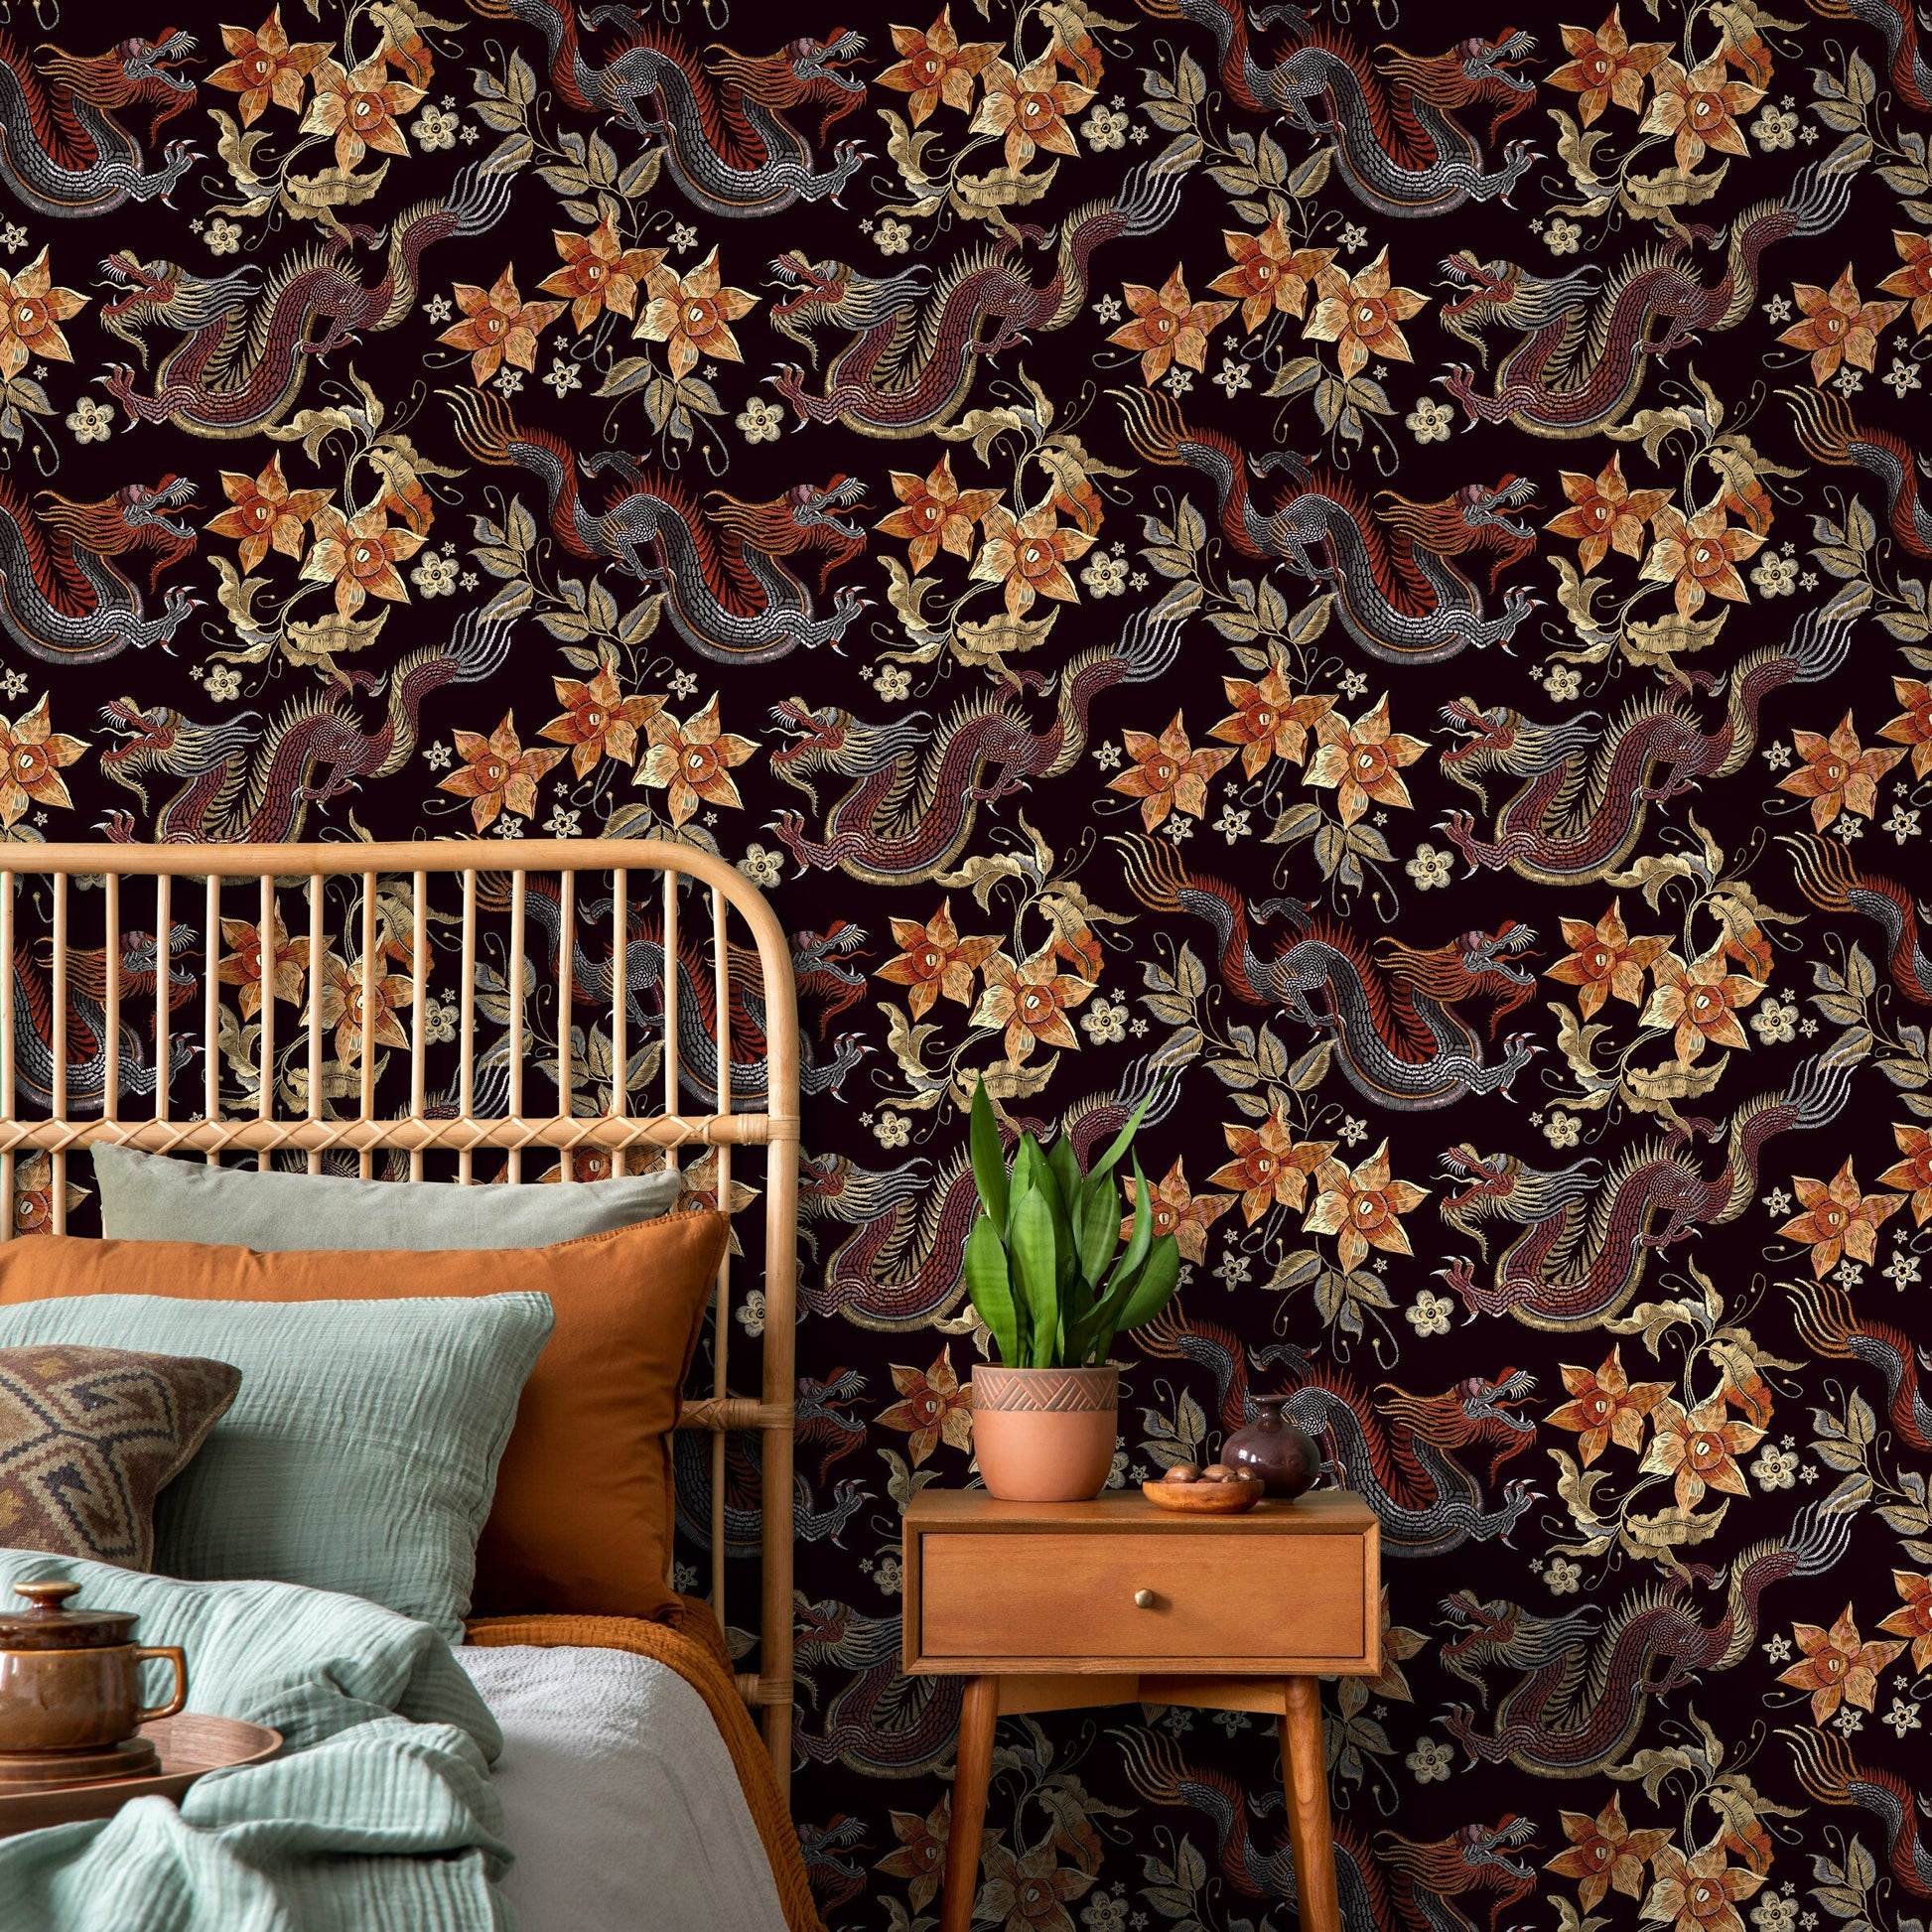 Dragon Chinoiserie Wallpaper Floral Vintage Wallpaper Peel and Stick and Traditional Wallpaper - D874